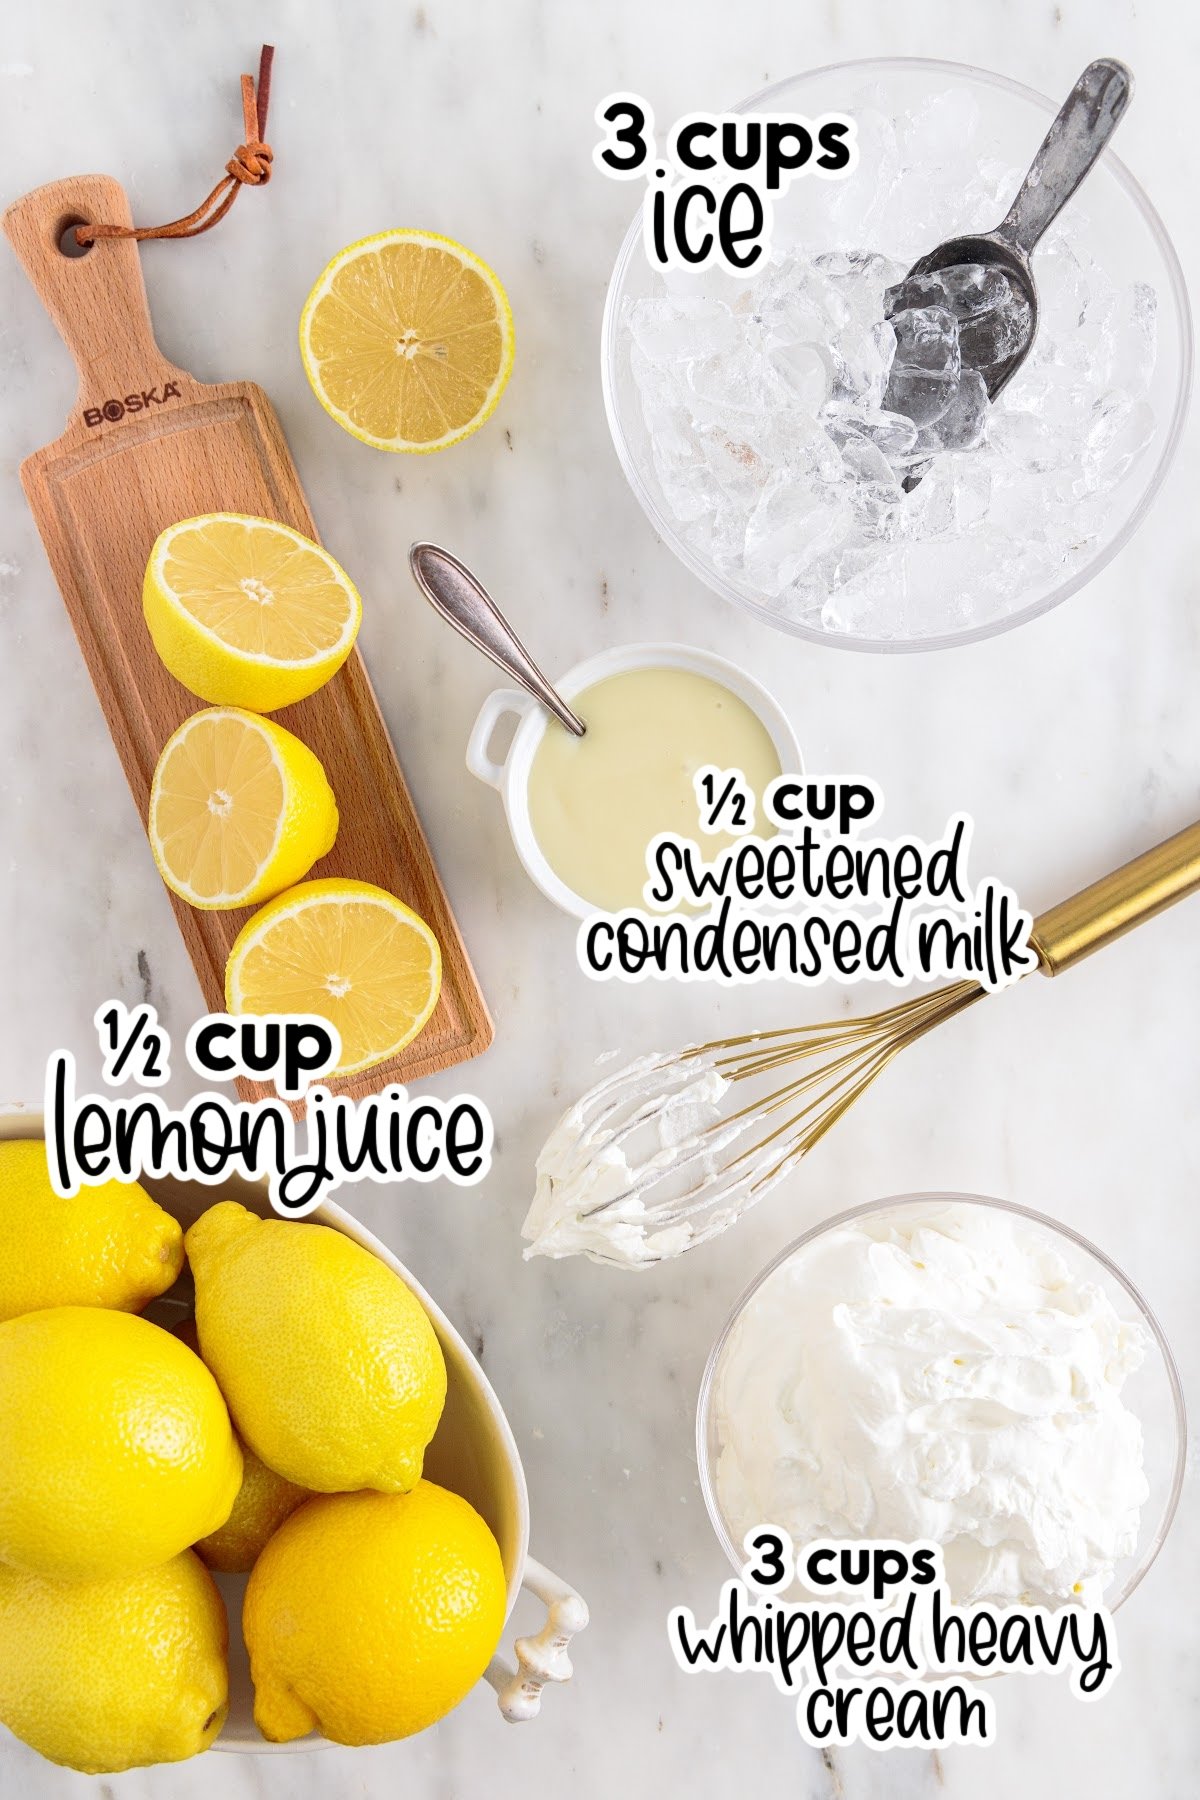 Bowl of ice, bowl of lemons, lemons on a cutting board, whipped cream with whisk, bowl of sweetened condensed milk - all ingredients to make whipped lemonade with text and amount labels.